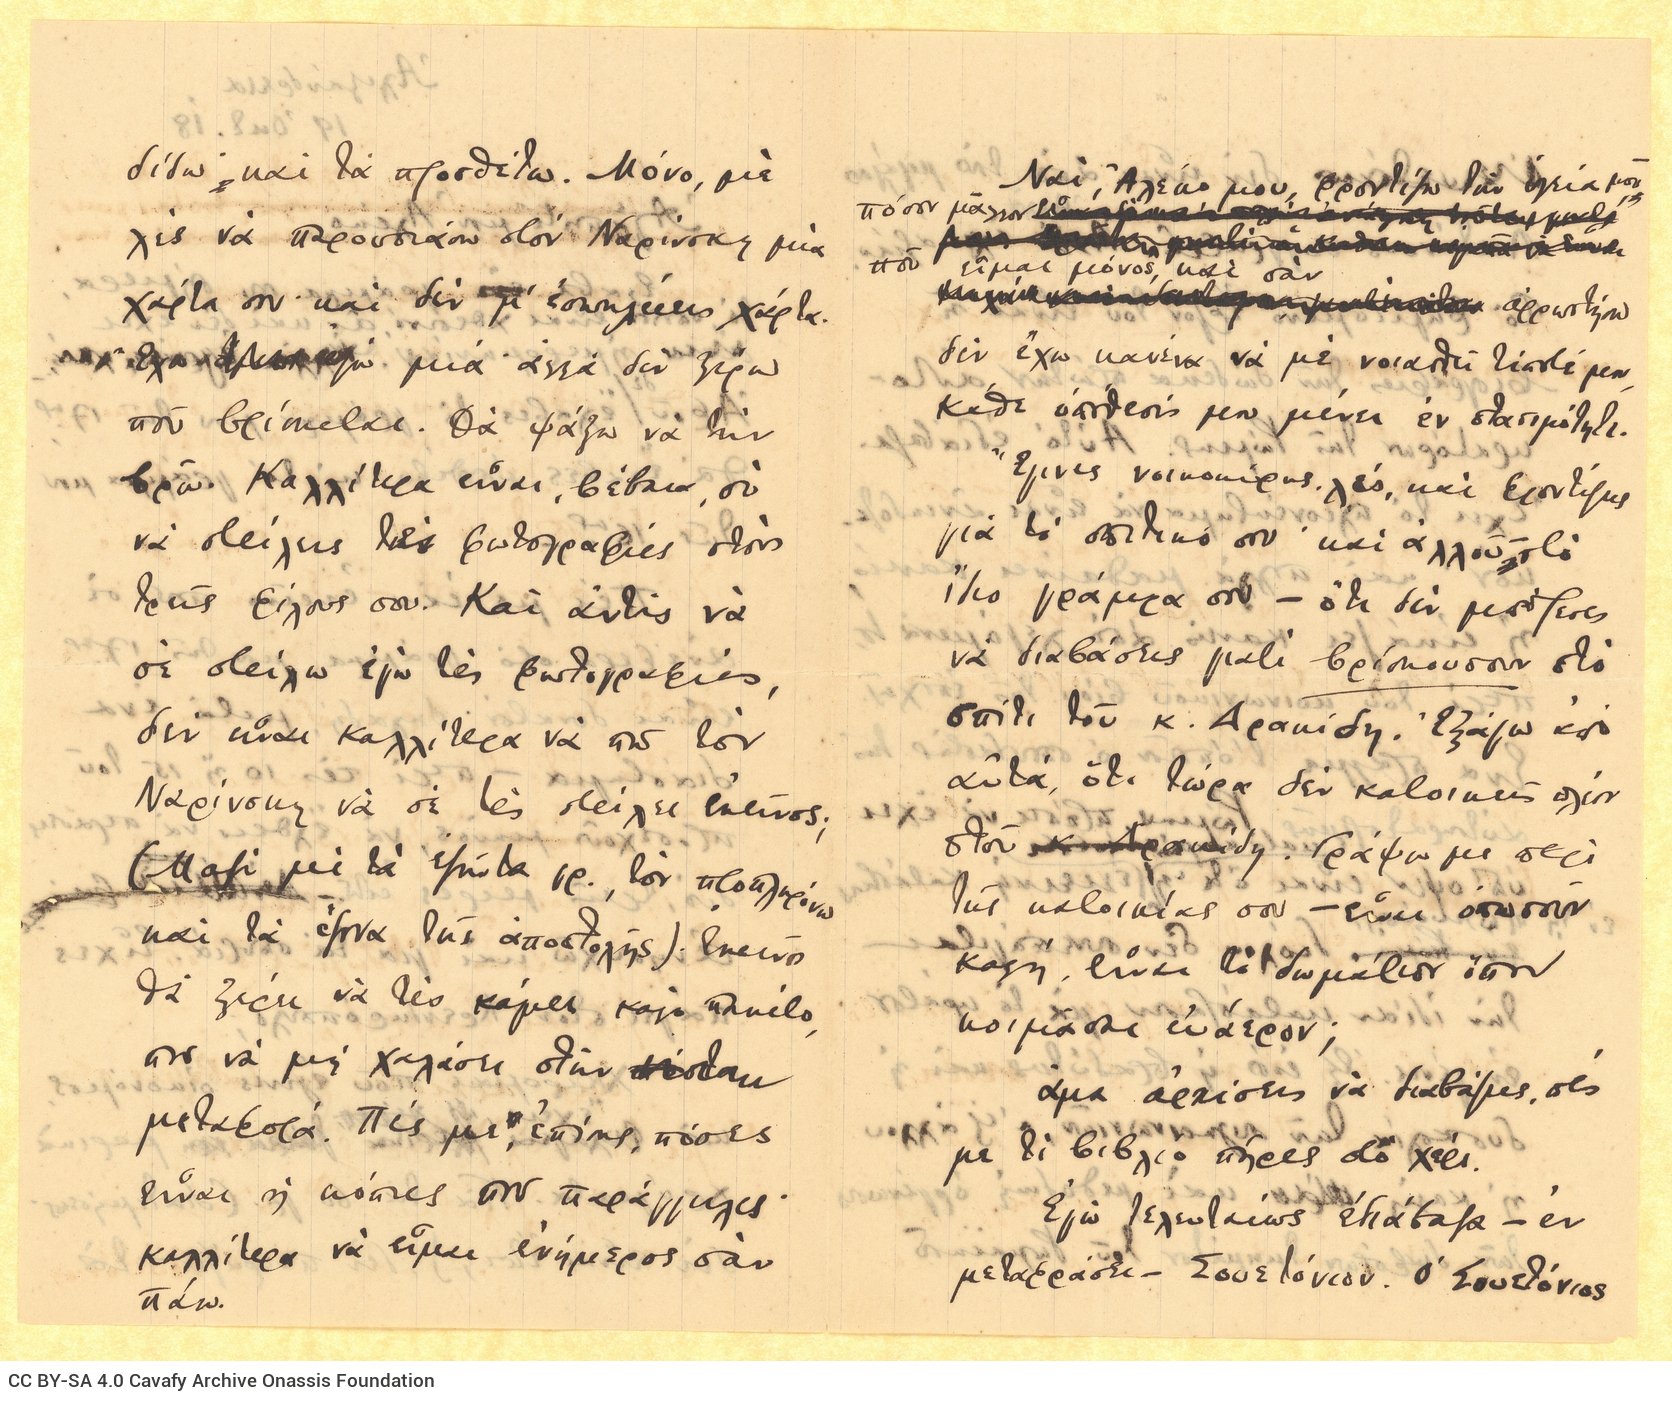 Handwritten letter by Cavafy to Alekos Singopoulo, in a bifolio and on one side of a sheet. Reference to the correspondenc